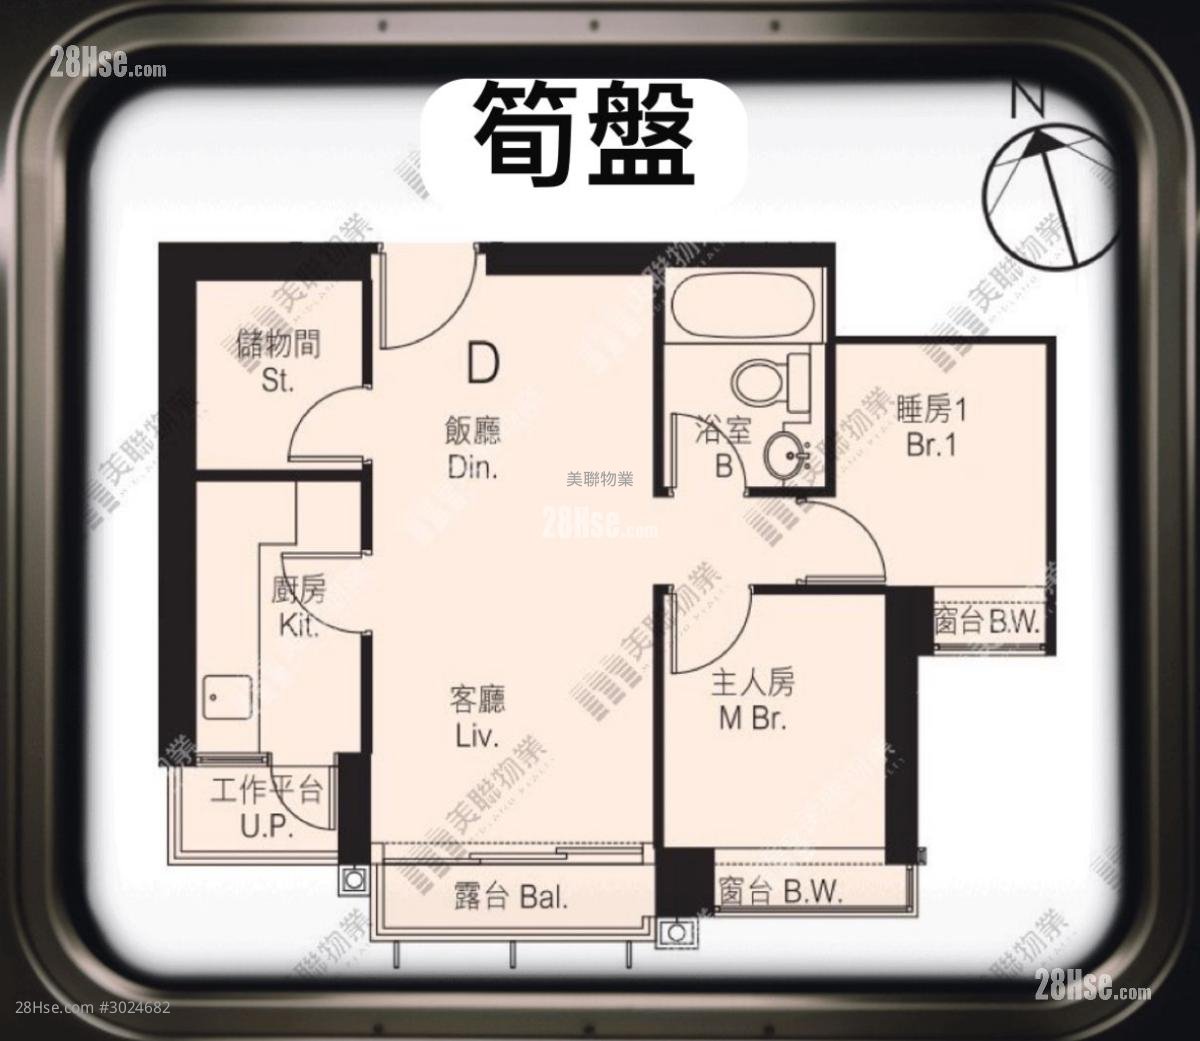 Double Cove Sell 2 bedrooms , 1 bathrooms 498 ft²